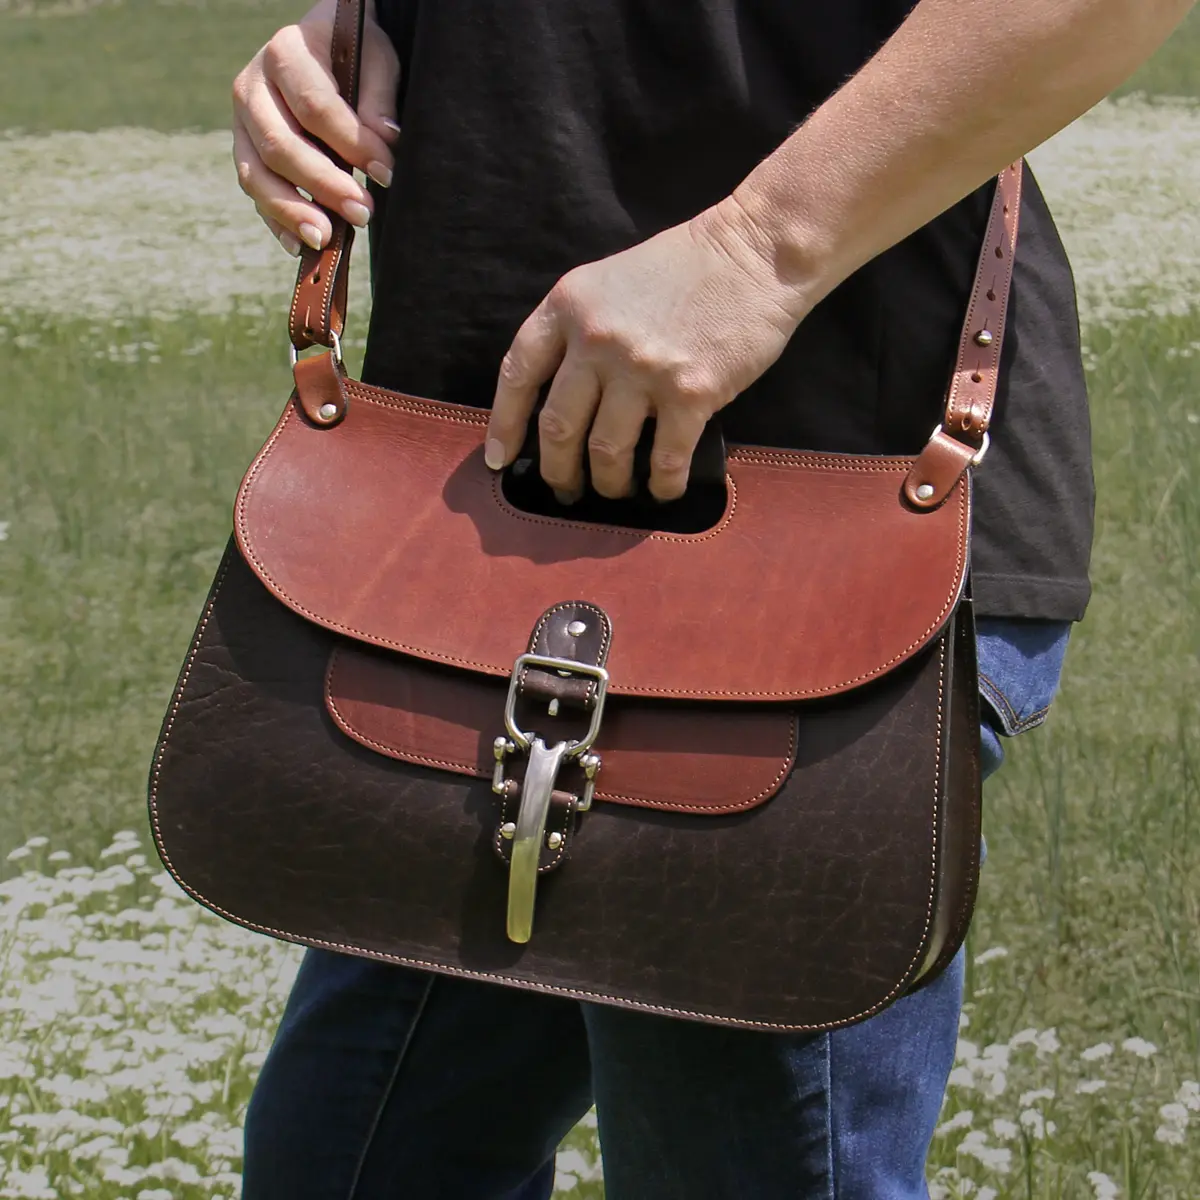 No. 18 Hunt bag in Tobacco Brown American Buffalo with Vintage Brown Steerhide Trim - Woman wearing the bag crossbody with her hand resting on the top handle